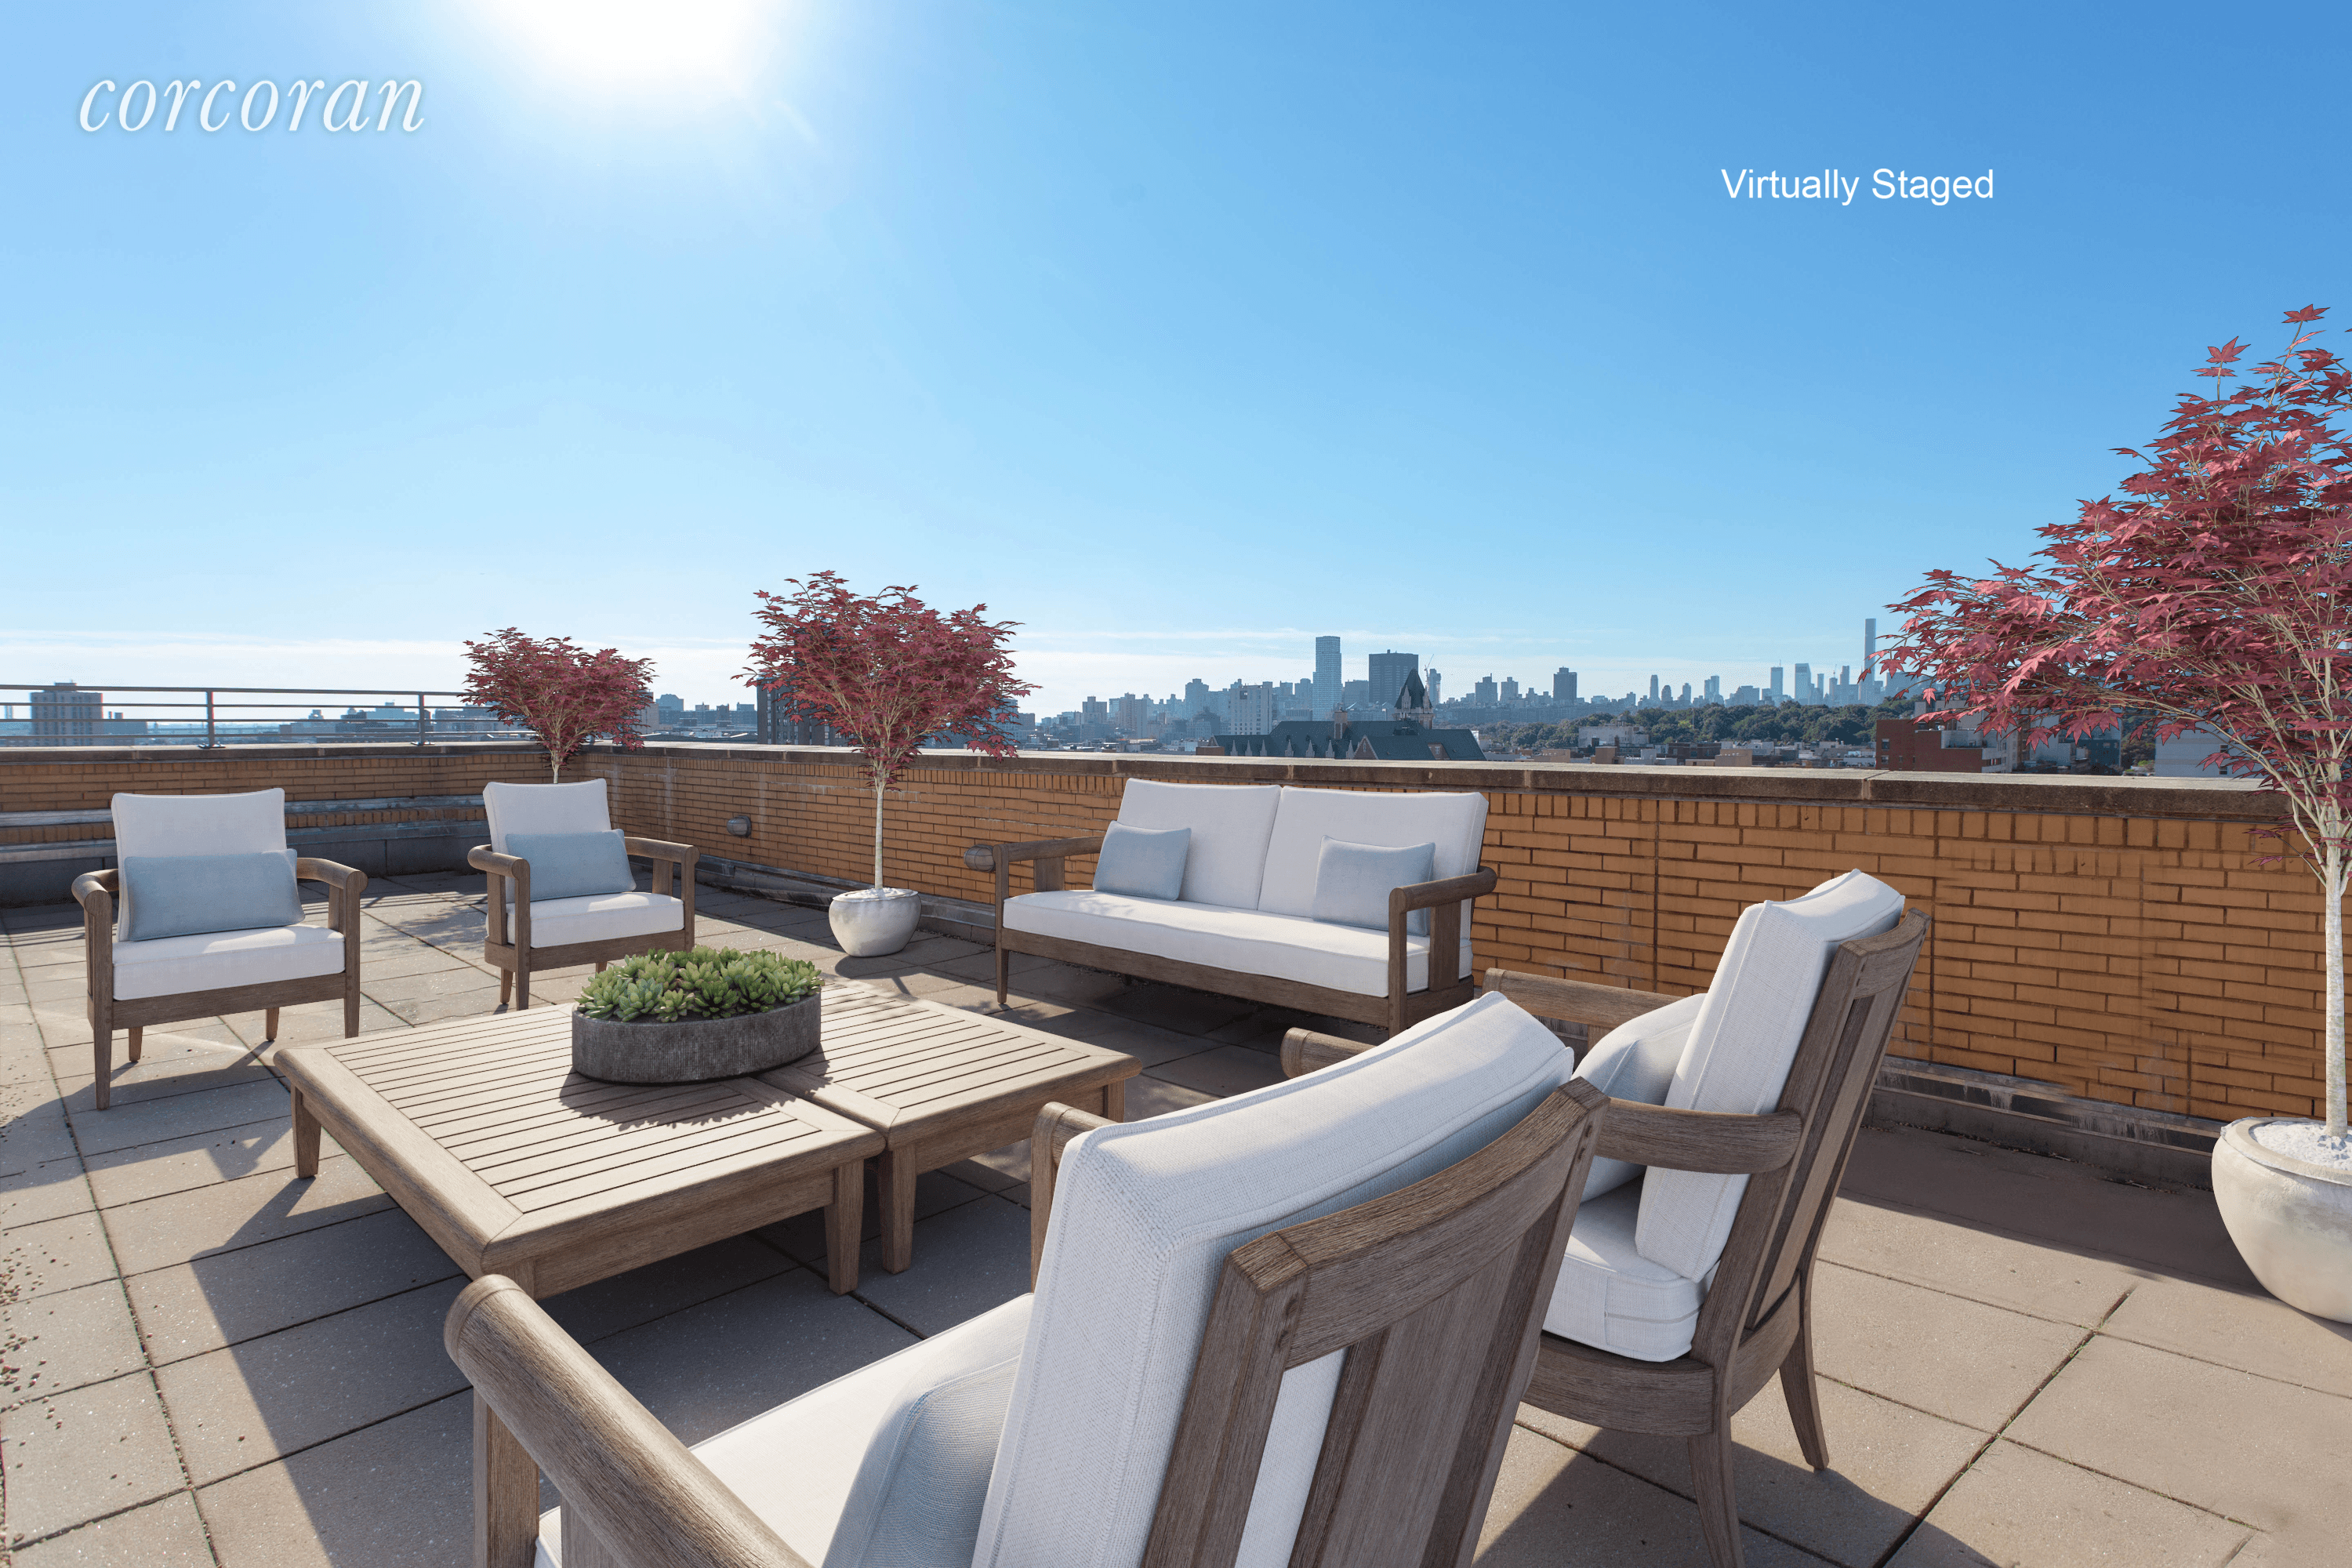 301 West 118th Street PH3D is a sprawling Penthouse duplex with approximately 3, 456 SF of interior space and 1, 500 SF of private outdoor space, is a rare find ...